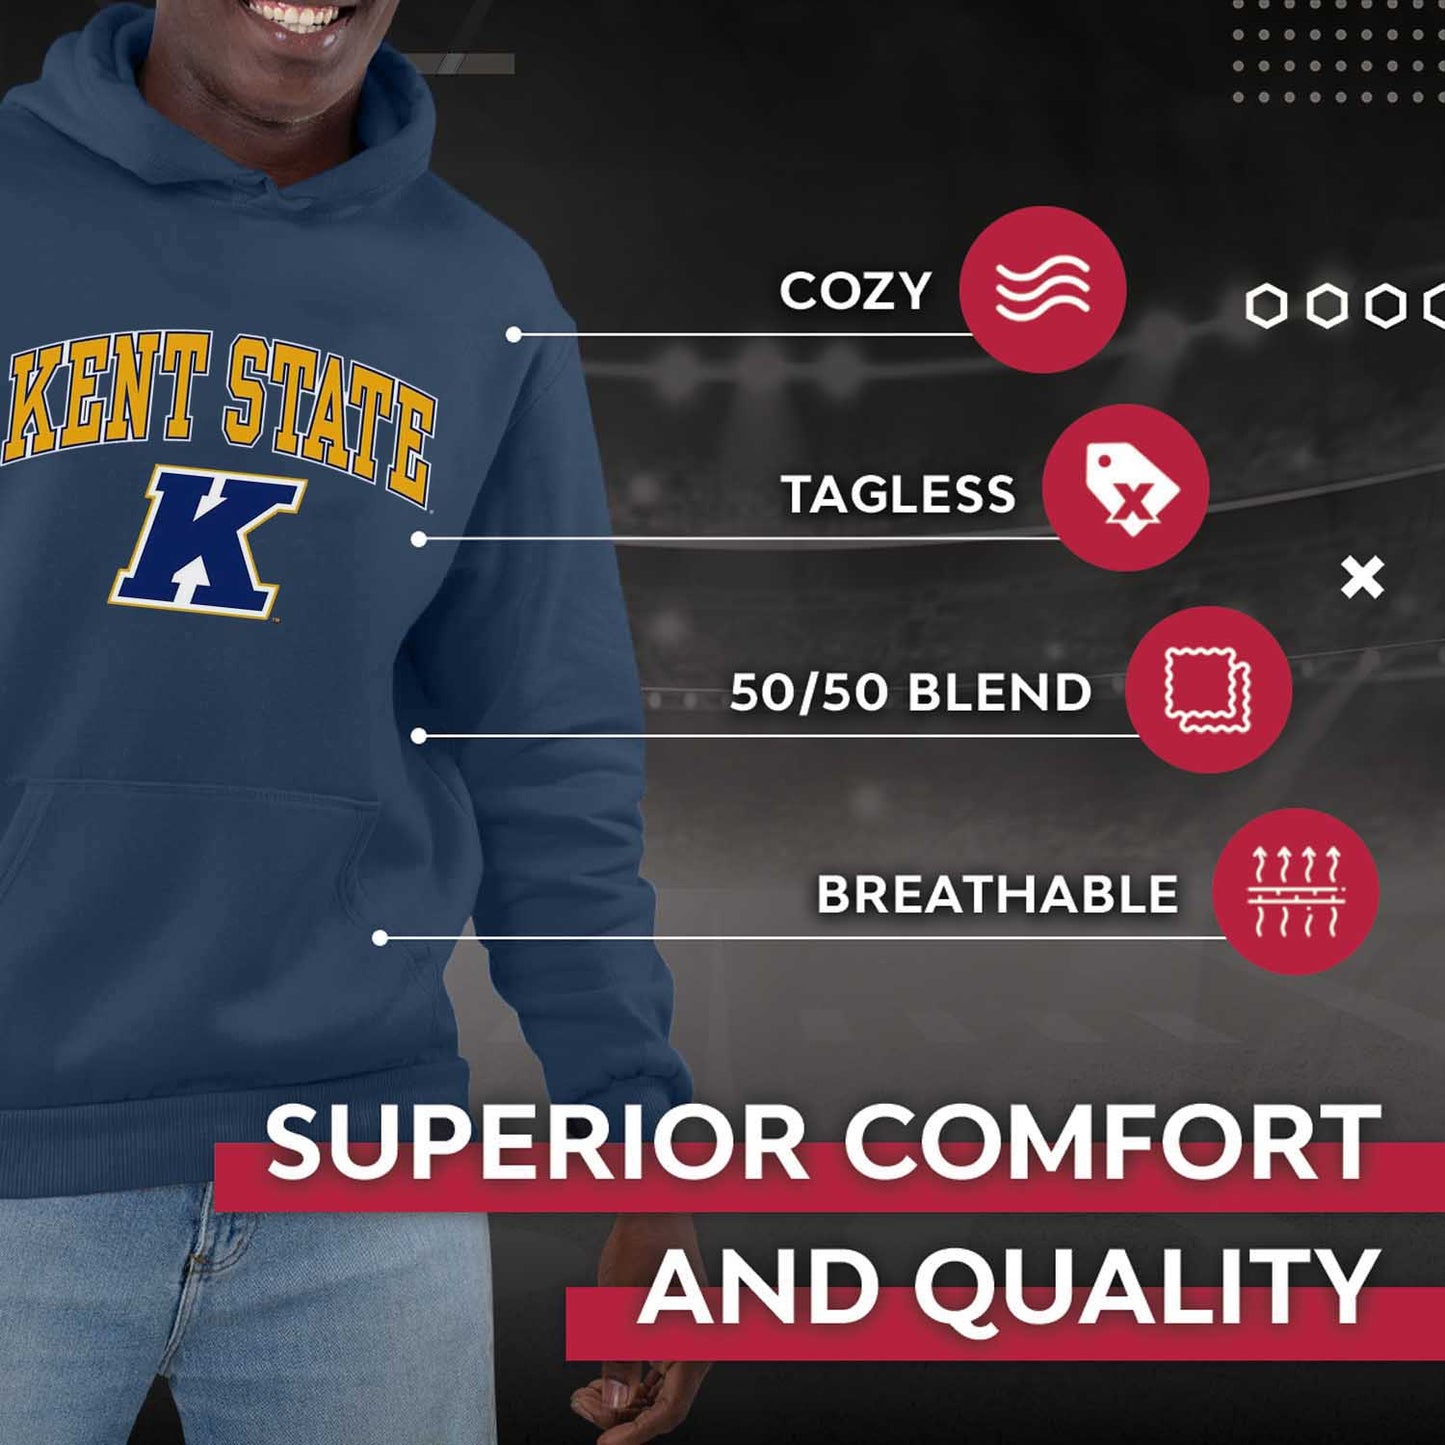 Kent State Golden Flashes Adult Arch & Logo Soft Style Gameday Hooded Sweatshirt - Navy